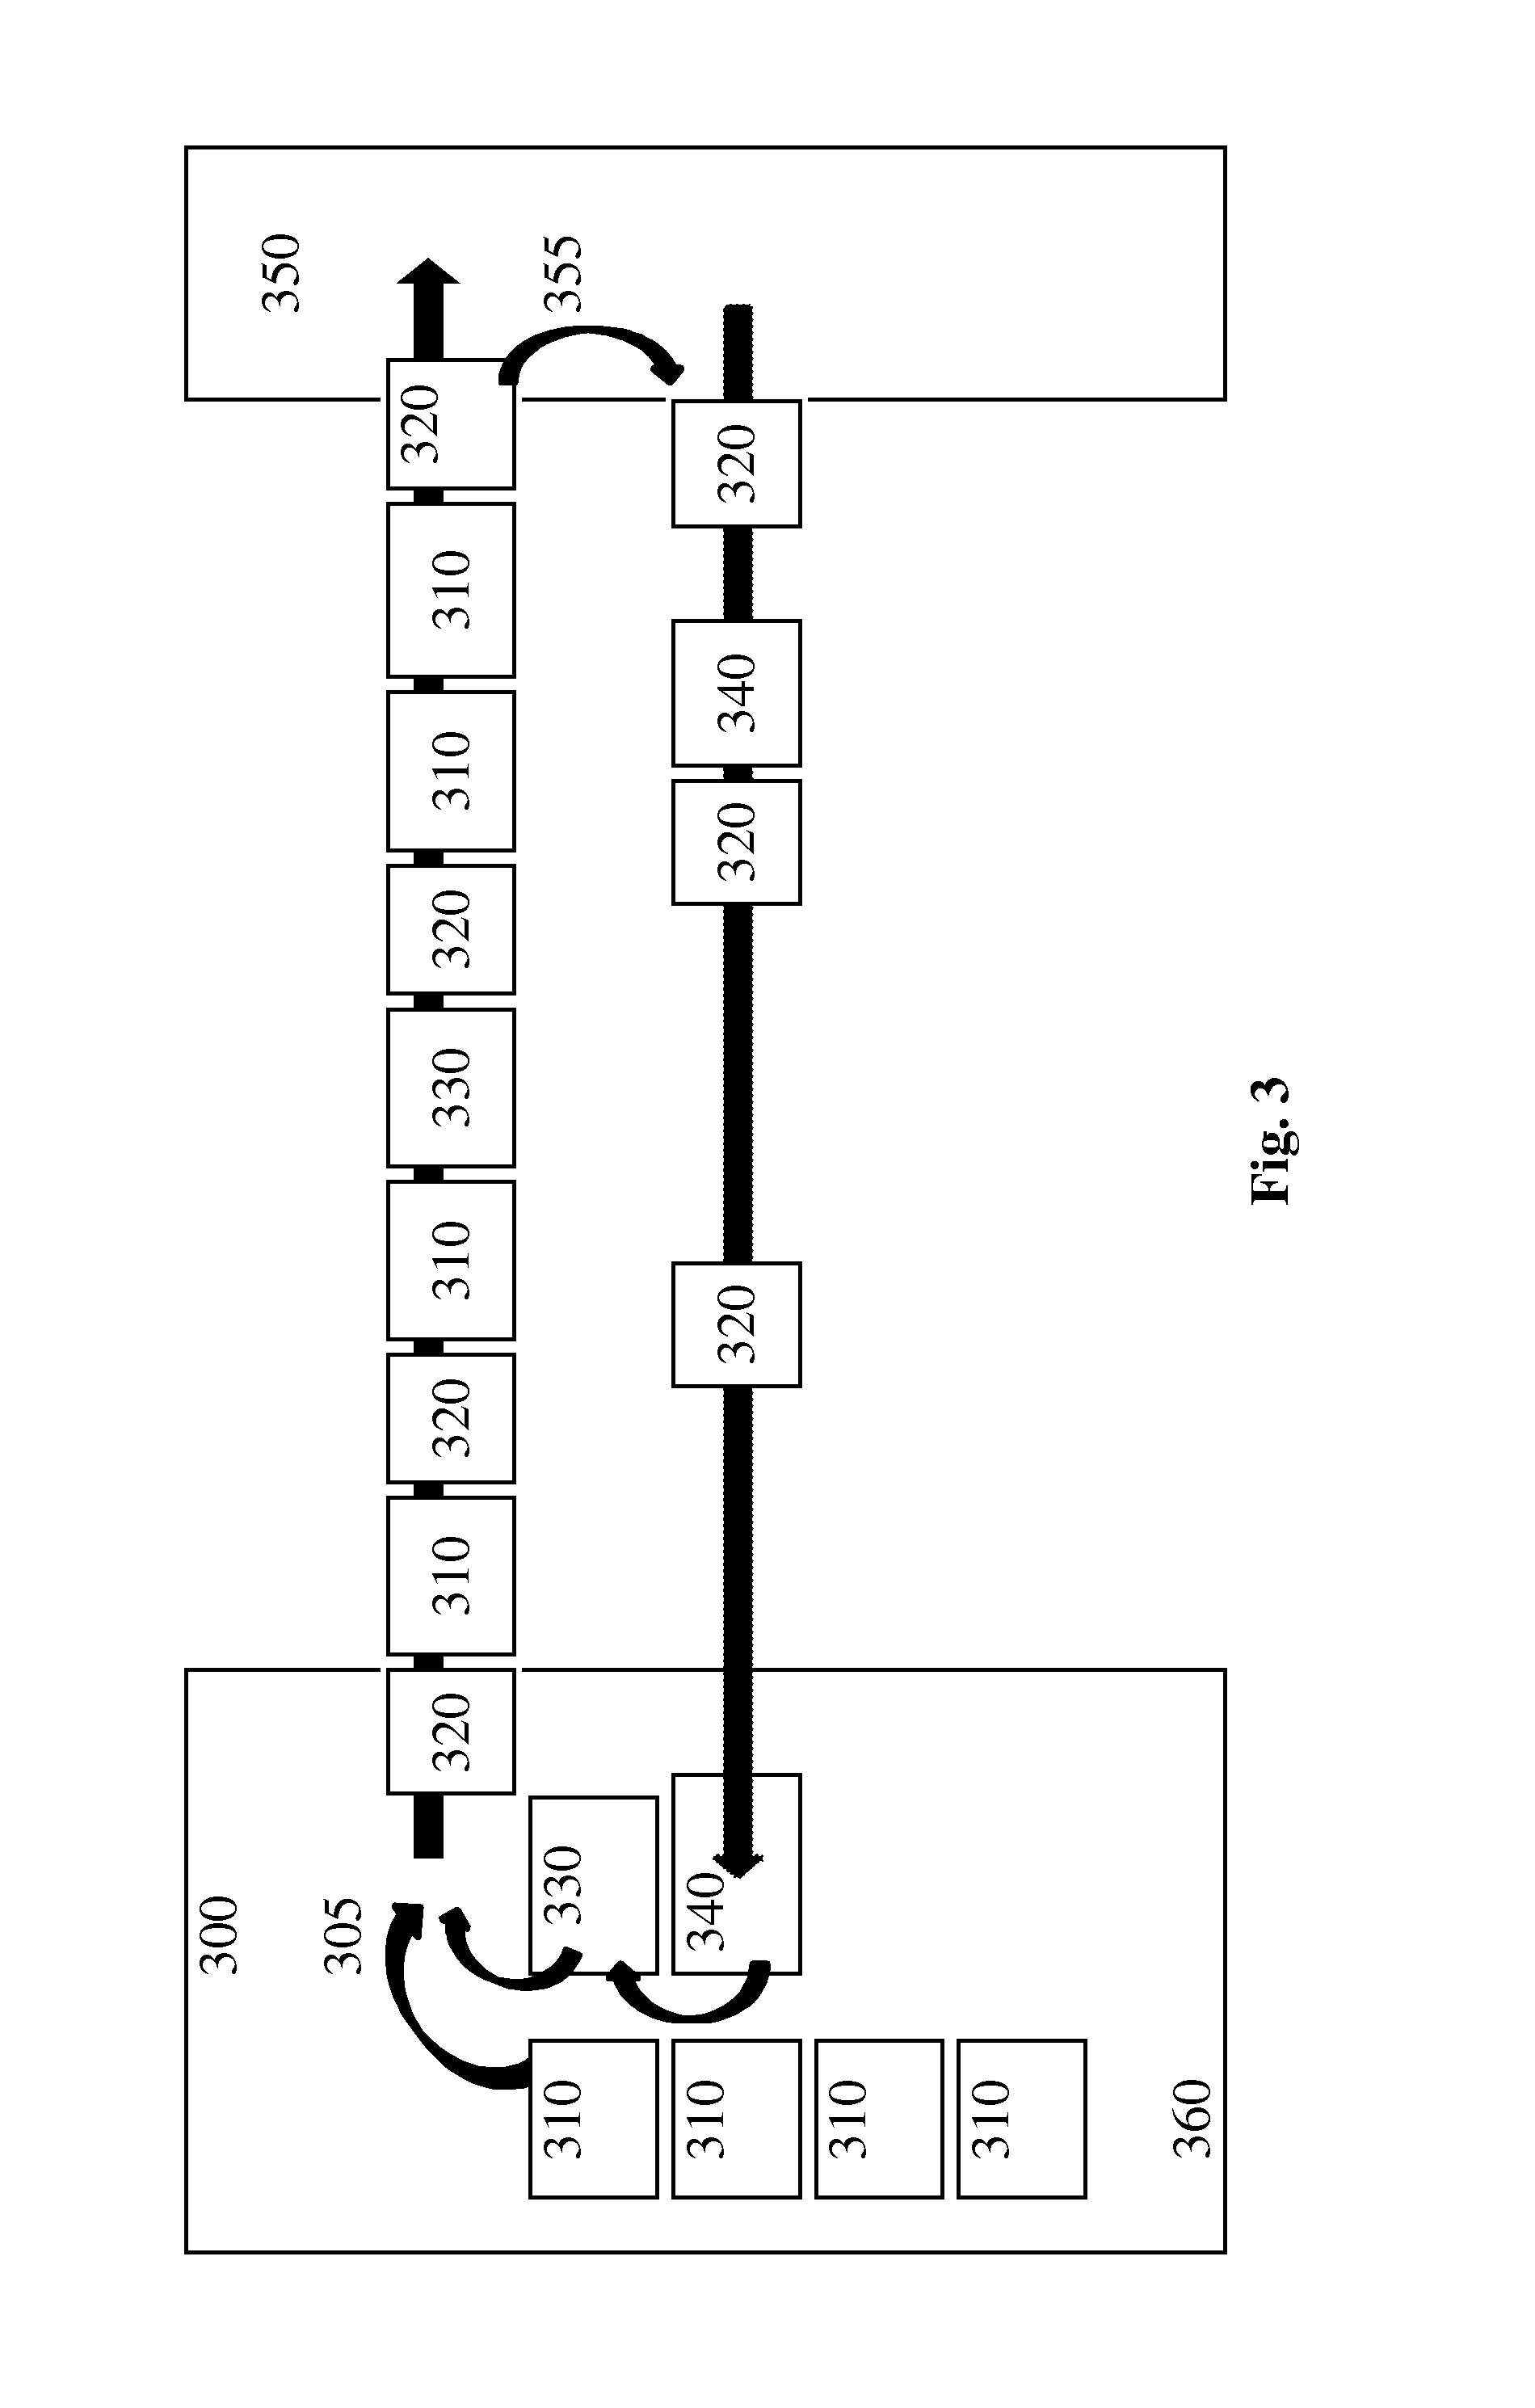 Method and system FPOR transferring data to improve responsiveness when sending large data sets